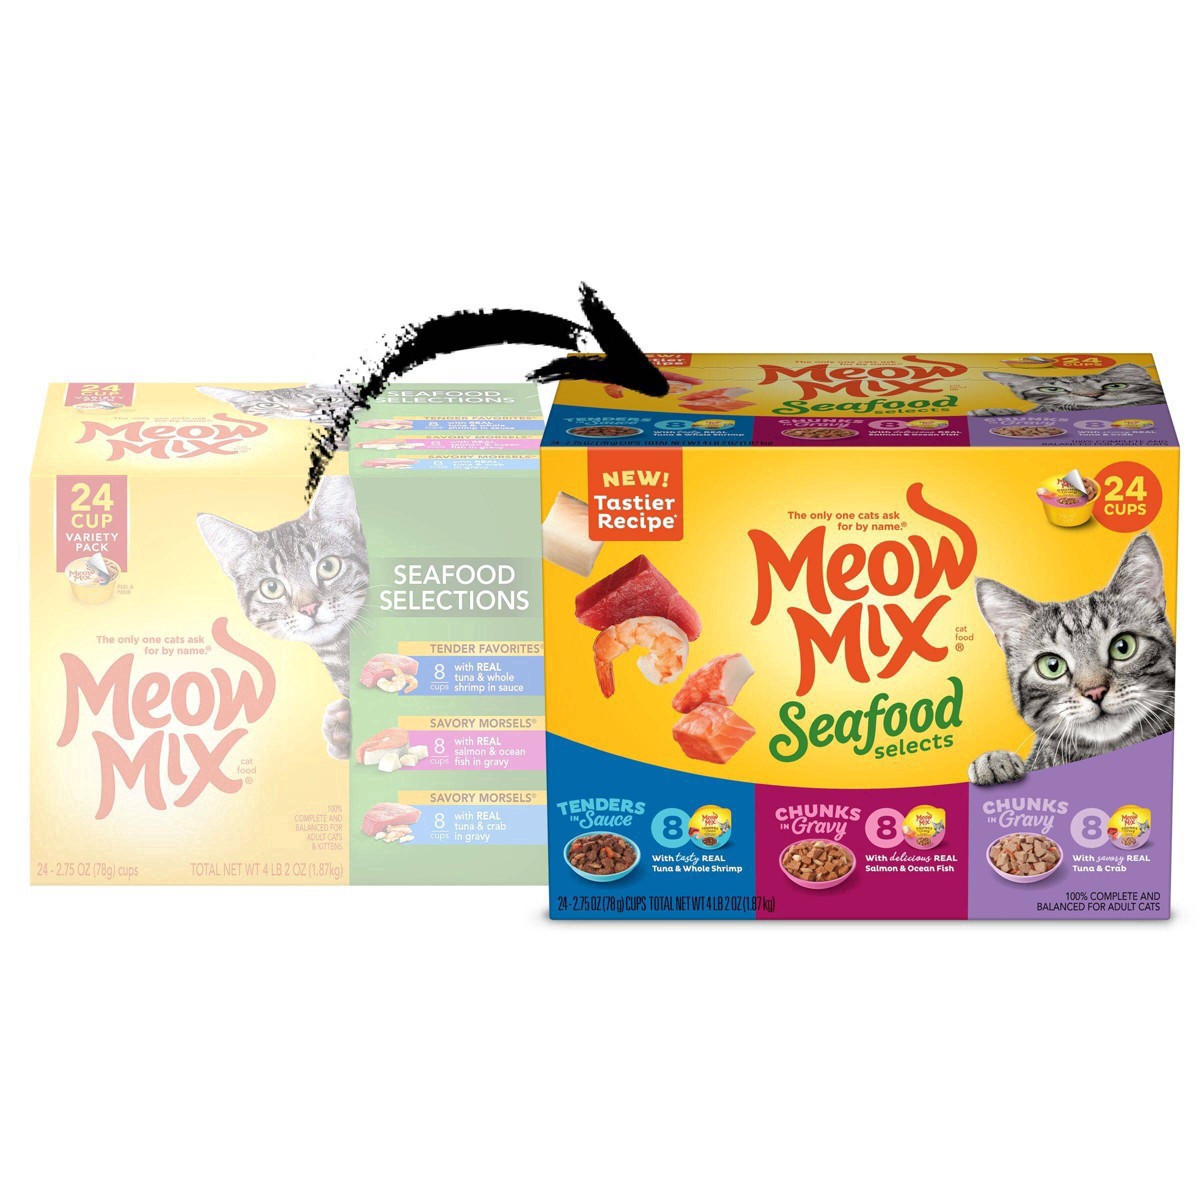 slide 3 of 27, Meow Mix Seafood Selects Wet Cat Food Variety Pack, 24 Cups, 2.75 Oz. Each (Packaging And Formulation Updates Underway), 24 ct